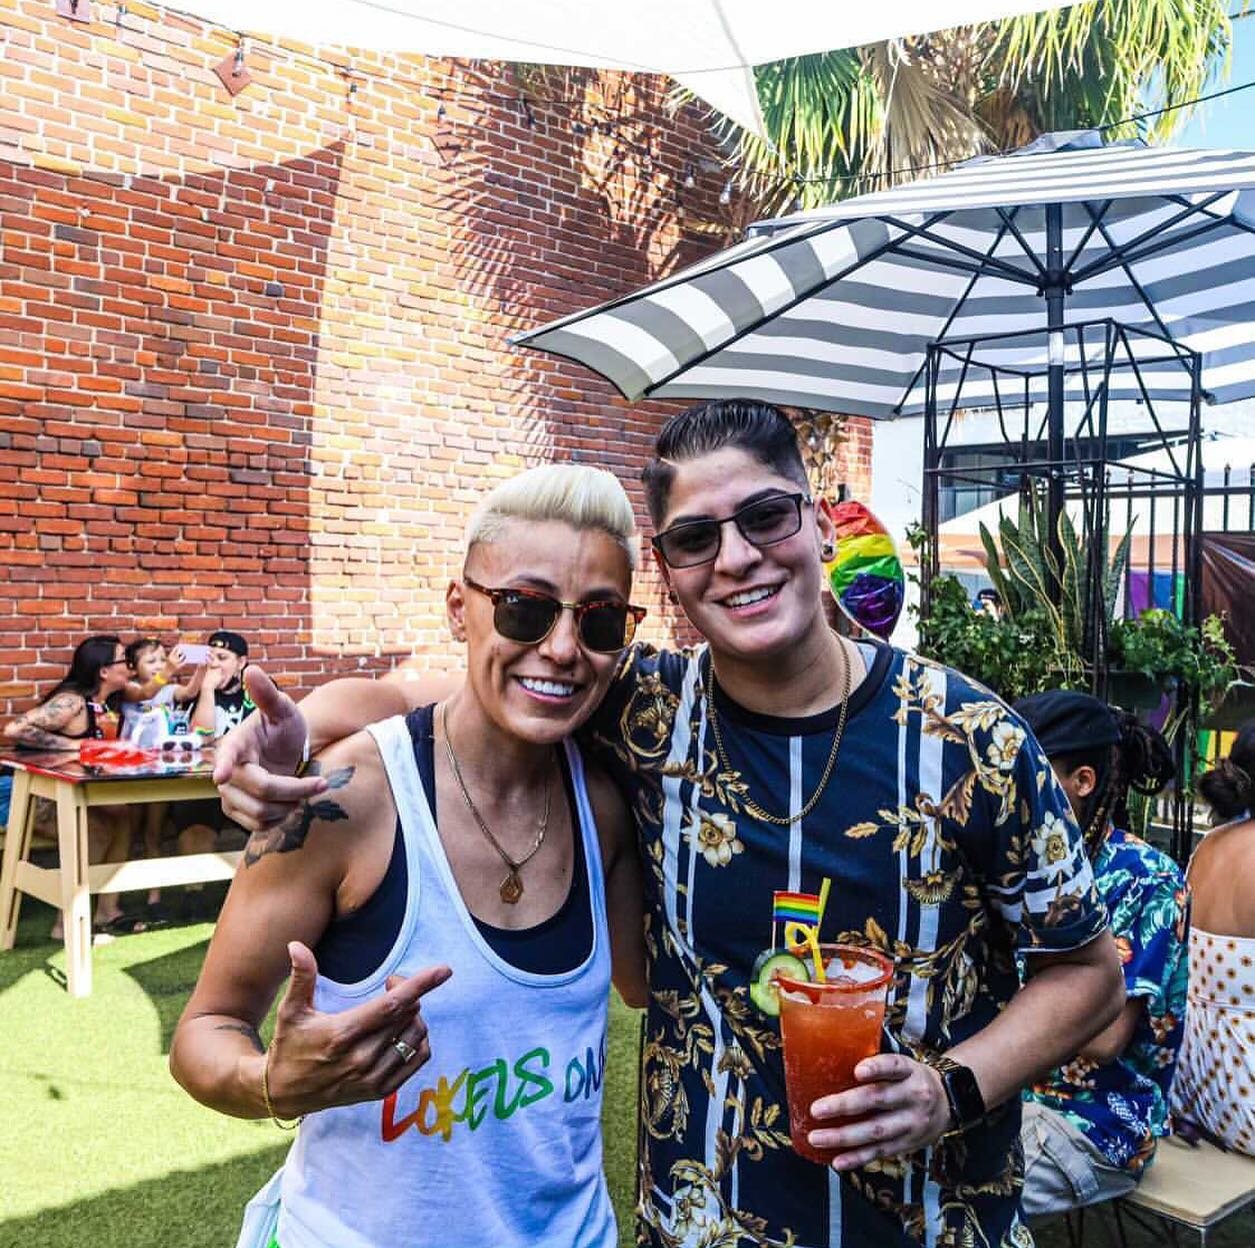 Thank you @lokels.only.cafe @djlesortiz for putting on amazing #pride event. 🌈 Everyone killed it! Those micheladas from @icedabove were bomb🤤 Looking forward to next month! Celebrating @djlesortiz birthday! 🔥🔥🔥 WE OUTSSIDEE

📷: @crystalonyxx